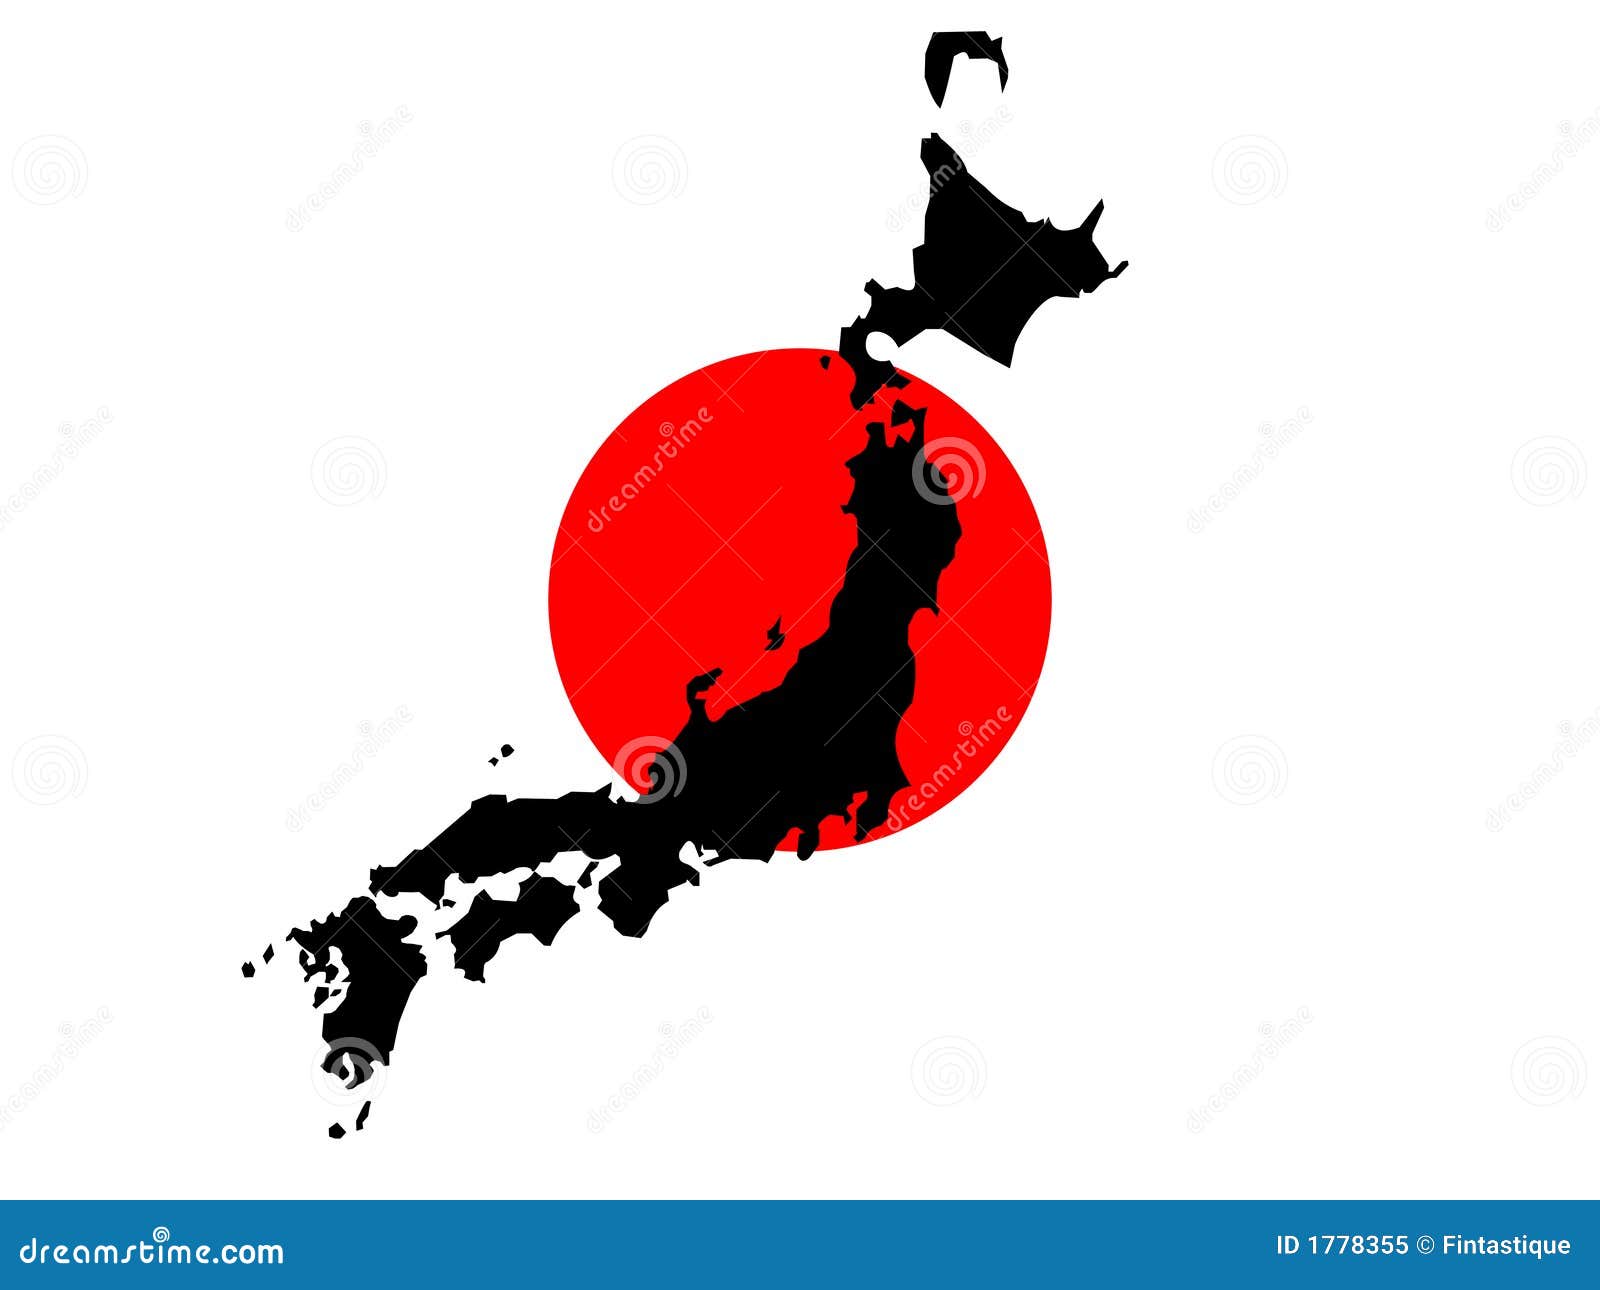 Map of Japan and Japanese Flag Stock Vector - Illustration of symbol,  geography: 1778355